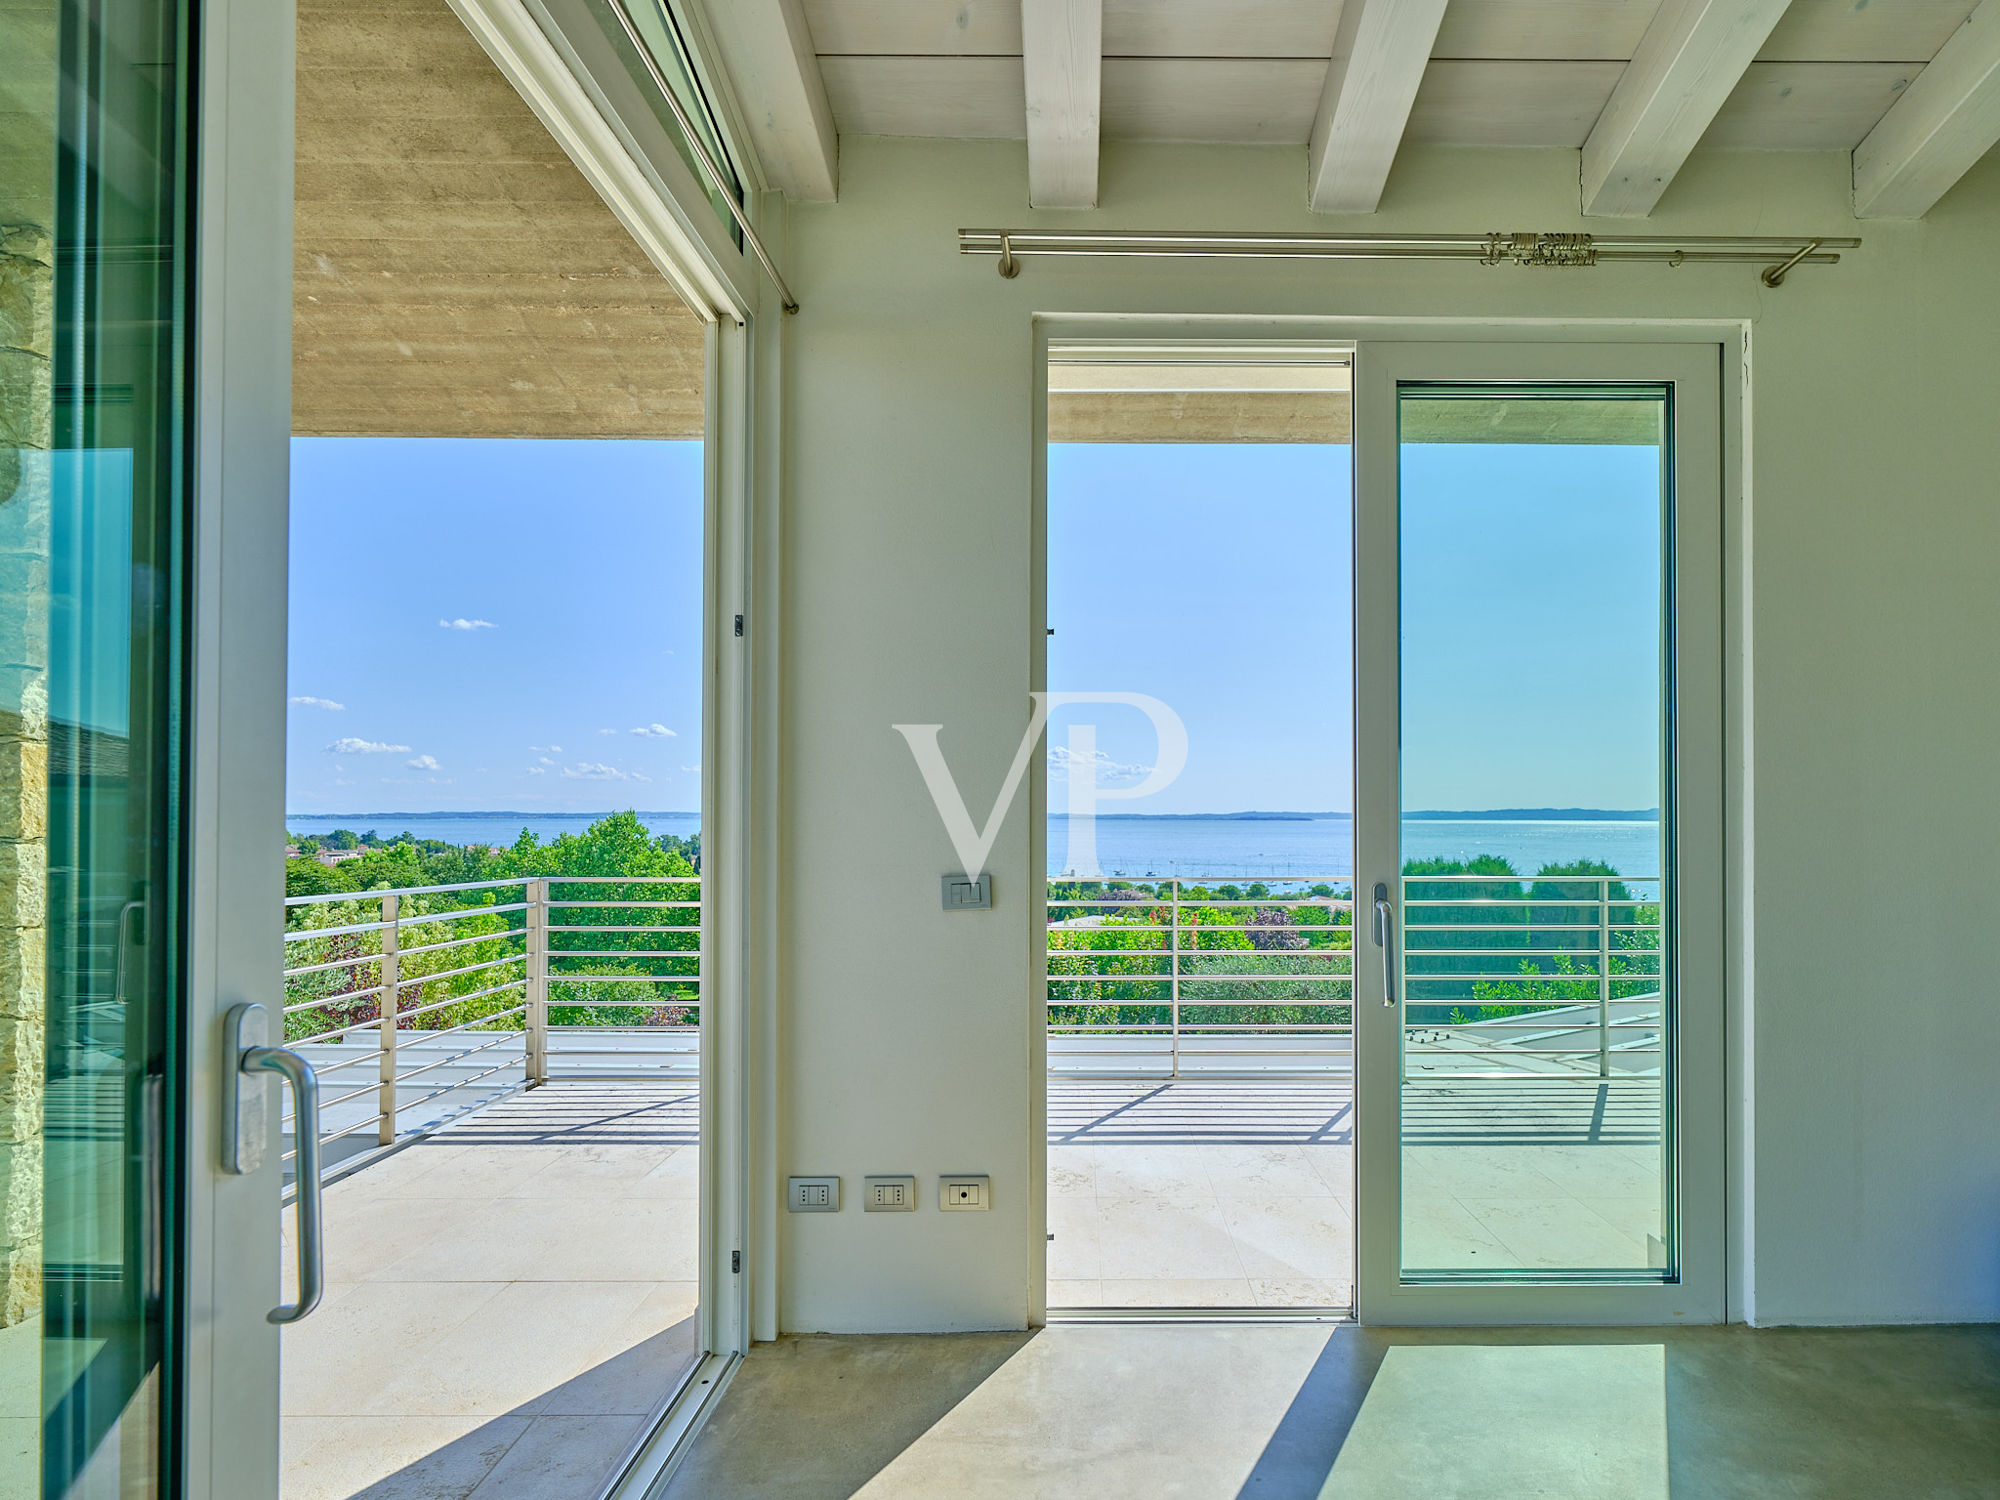 Villa with fantastic Lake View in the proximity of the historic center